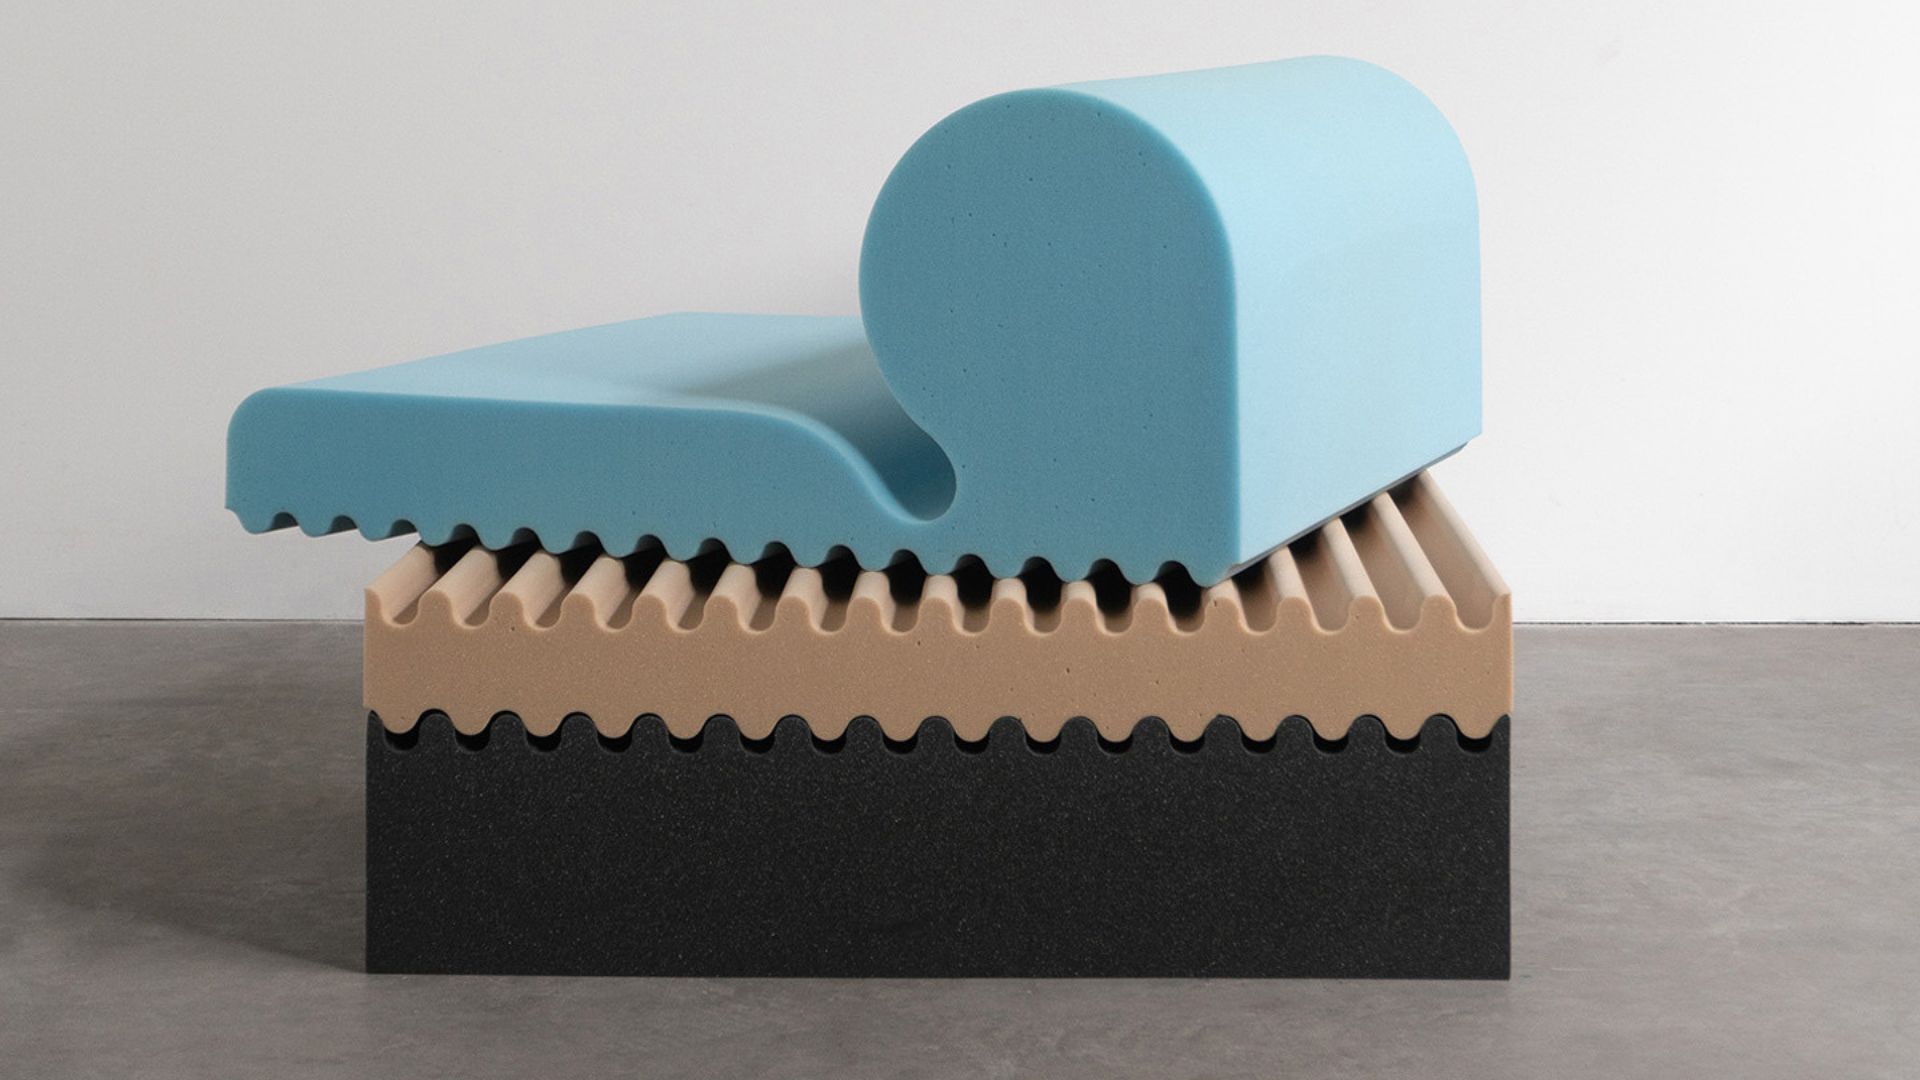 http://designwanted.com/wp-content/uploads/2021/11/Cutted-Clouds-by-Finemateria-_-polyurethane-foam-sofa-cover.jpg